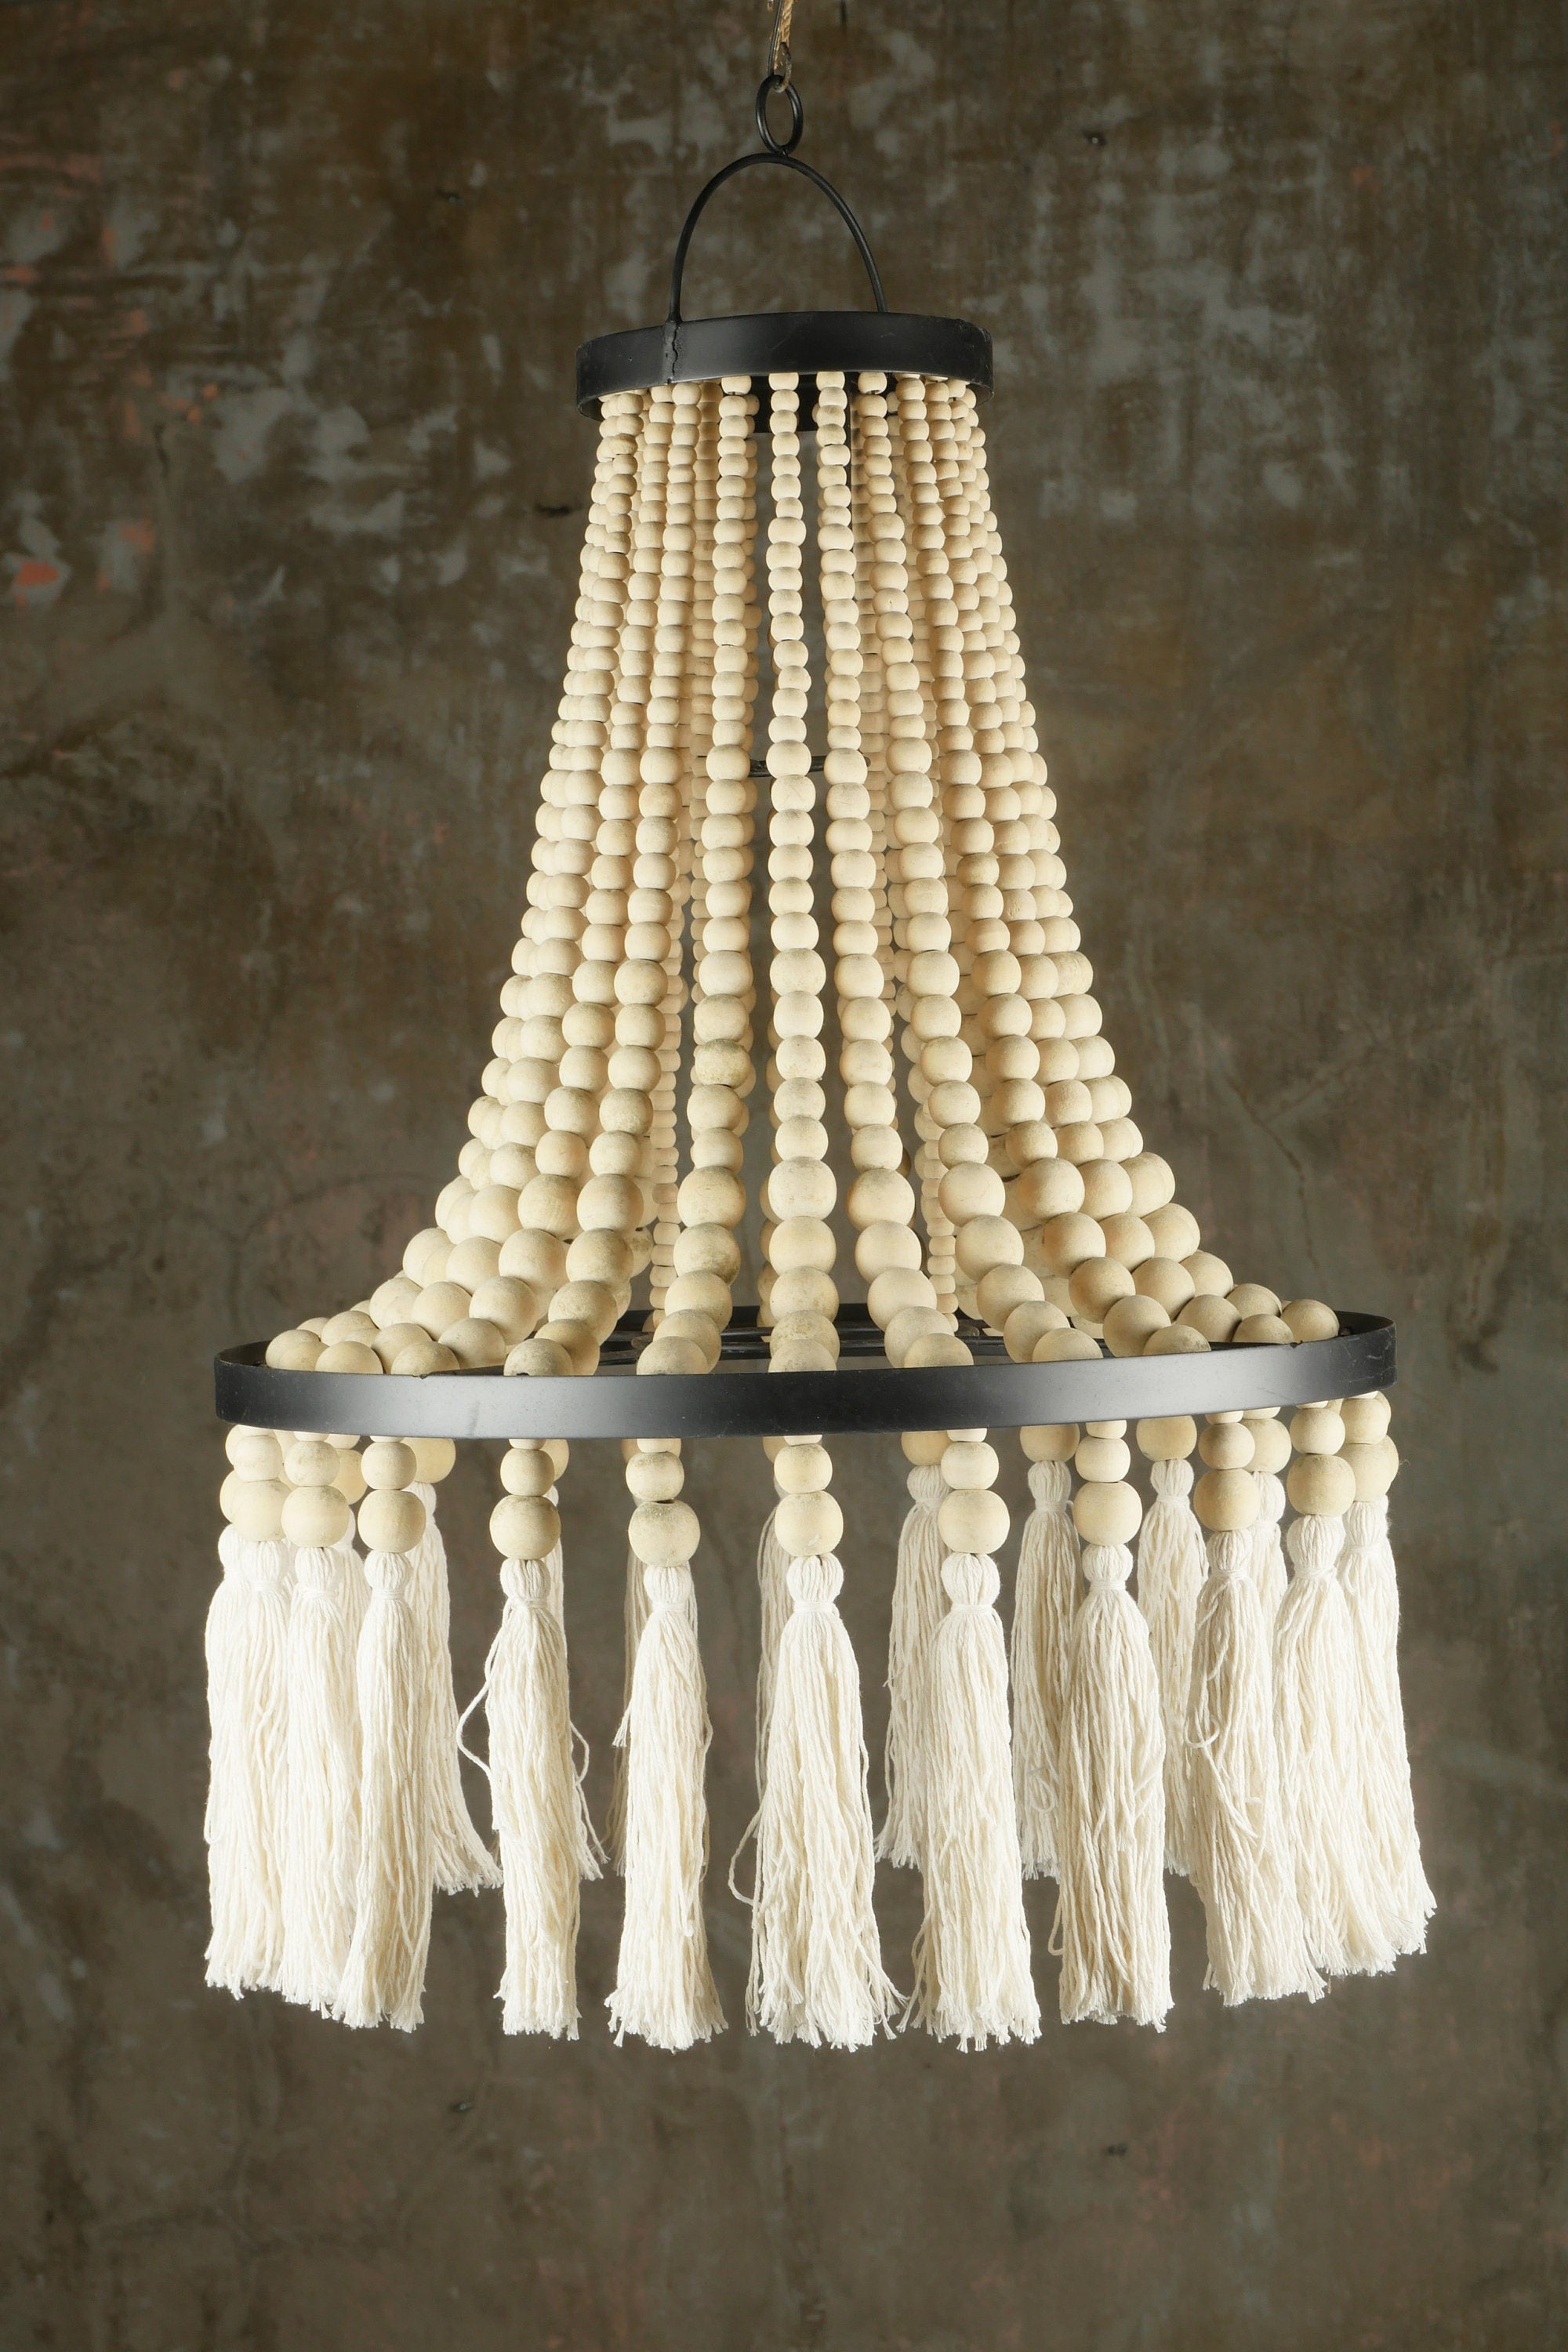 The Tassels and Wood beaded Lampshade - Beaded Chandelier - Bohemian Chandelier - Natural Lampshade - Wooden Chandelier - Boho Lampshade